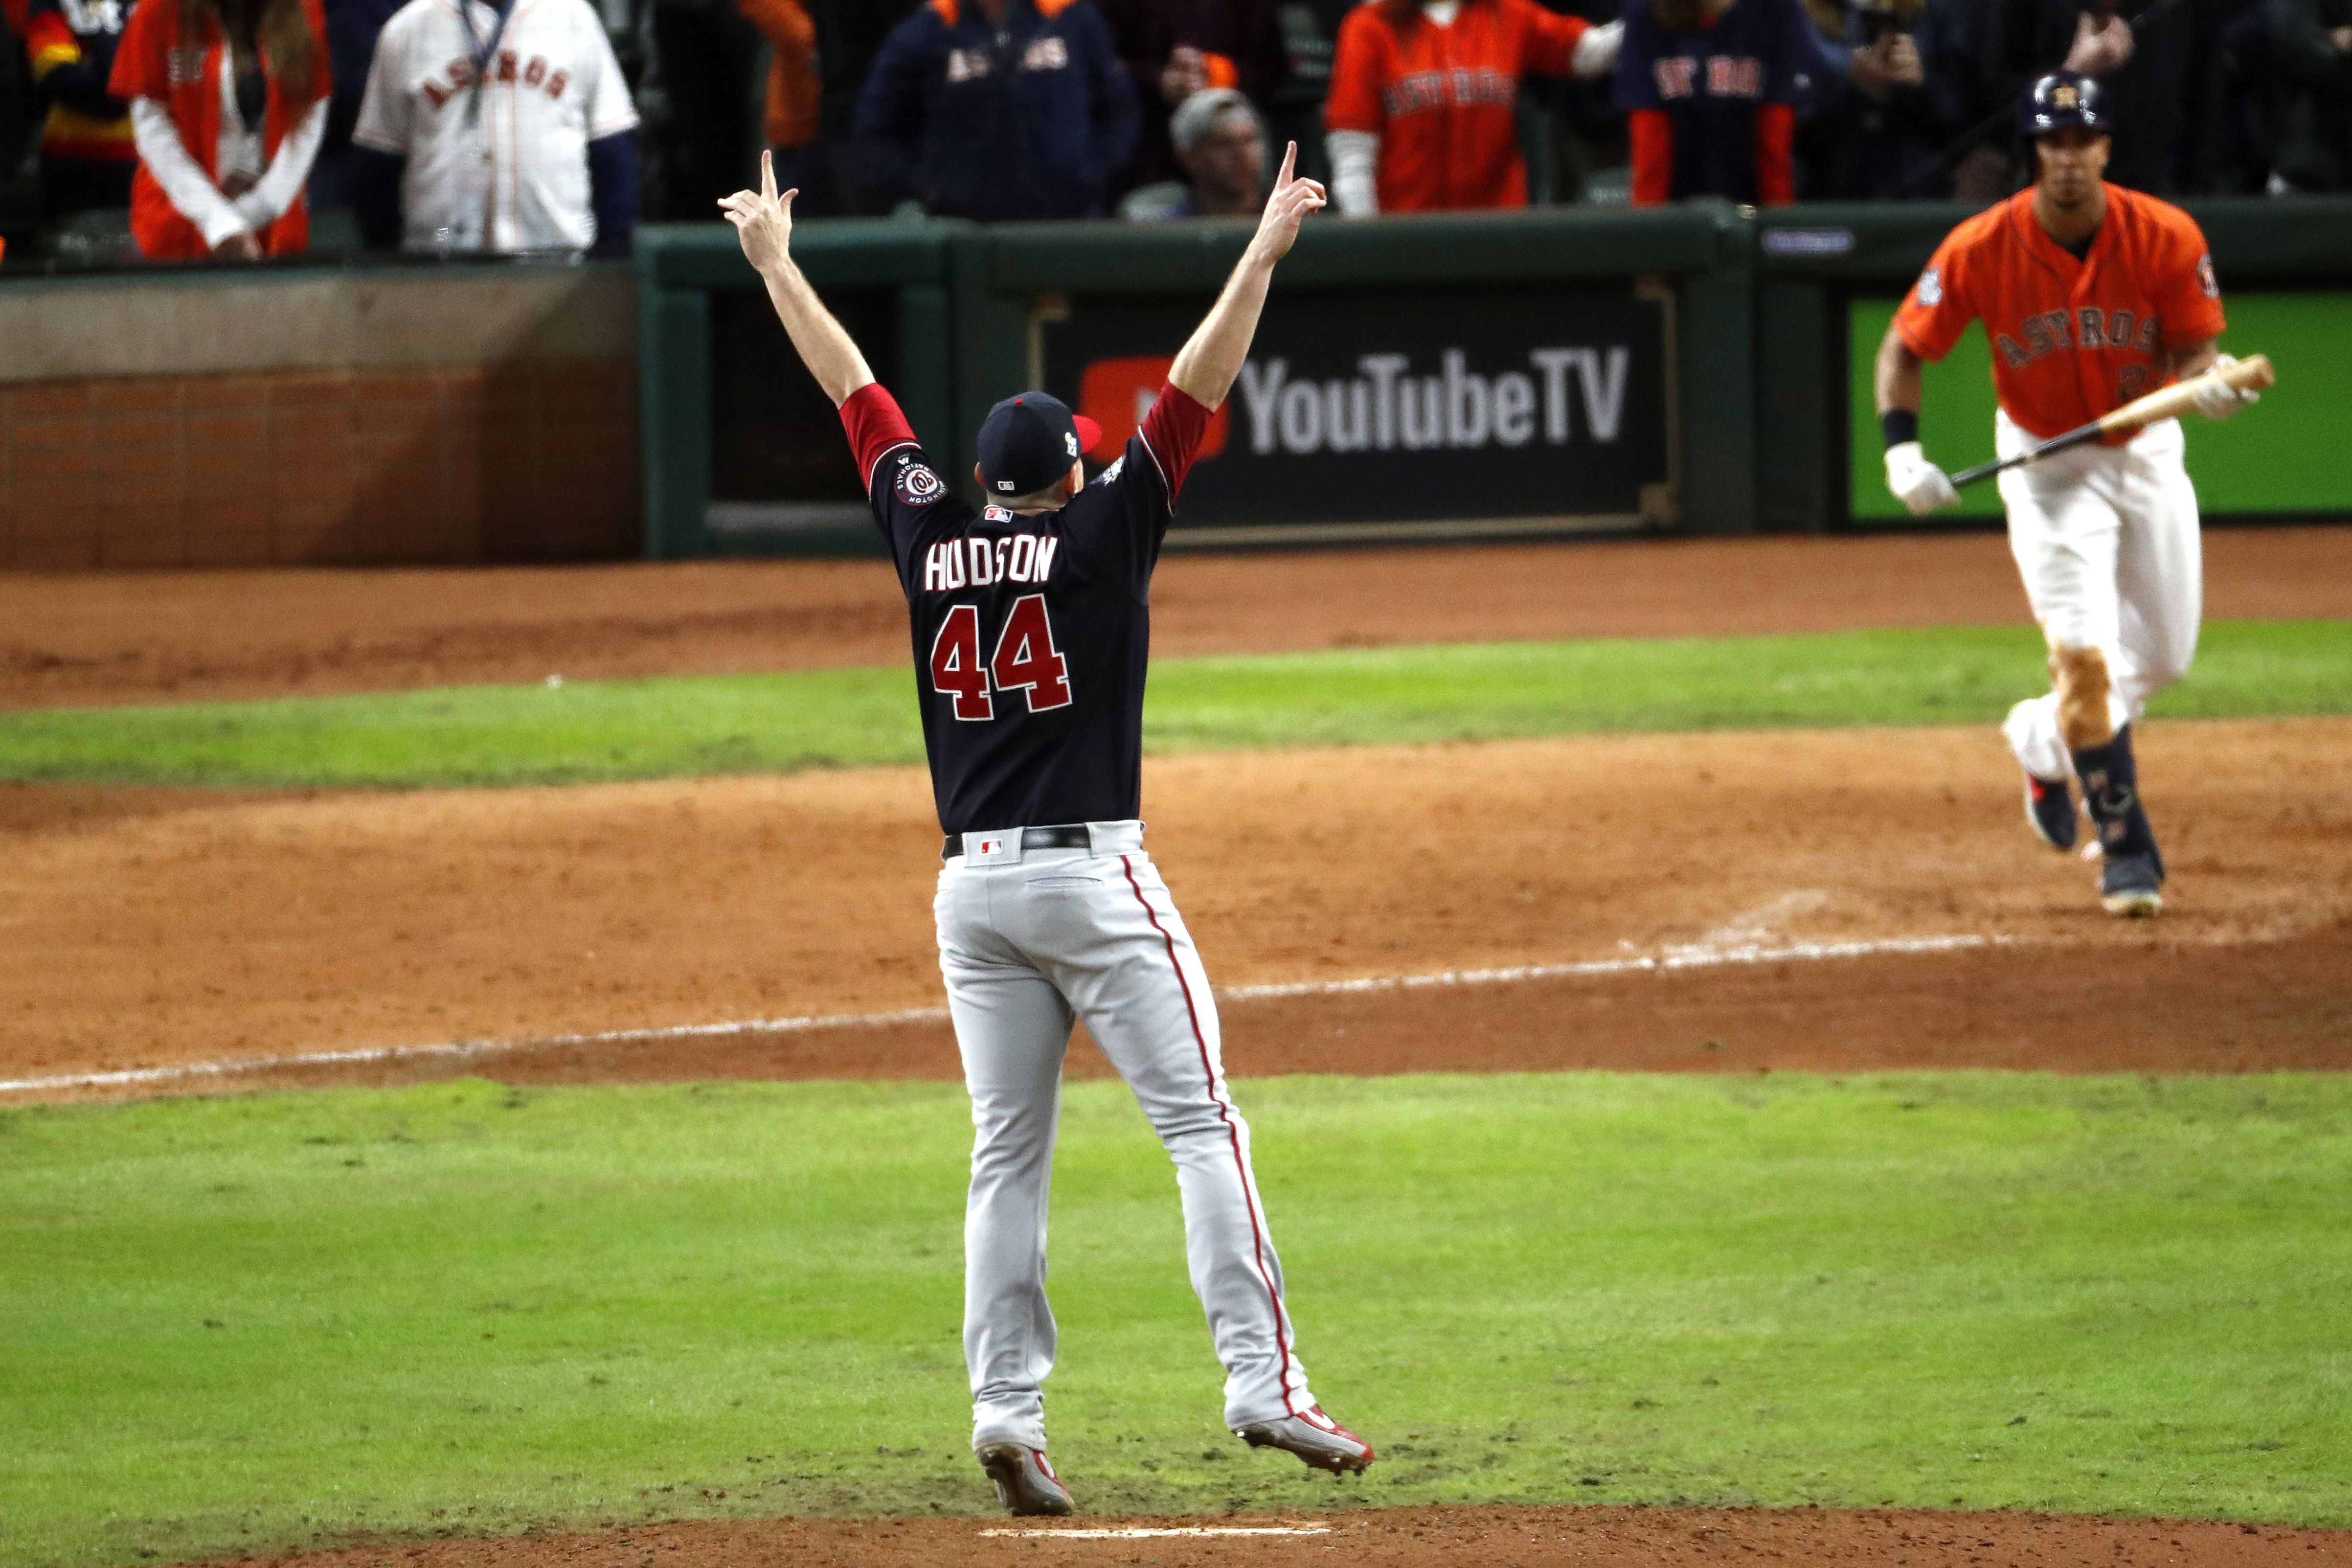 Daniel Hudson #44 of the Washington Nationals celebrates after striking out Michael Brantley #23 of the Houston Astros 